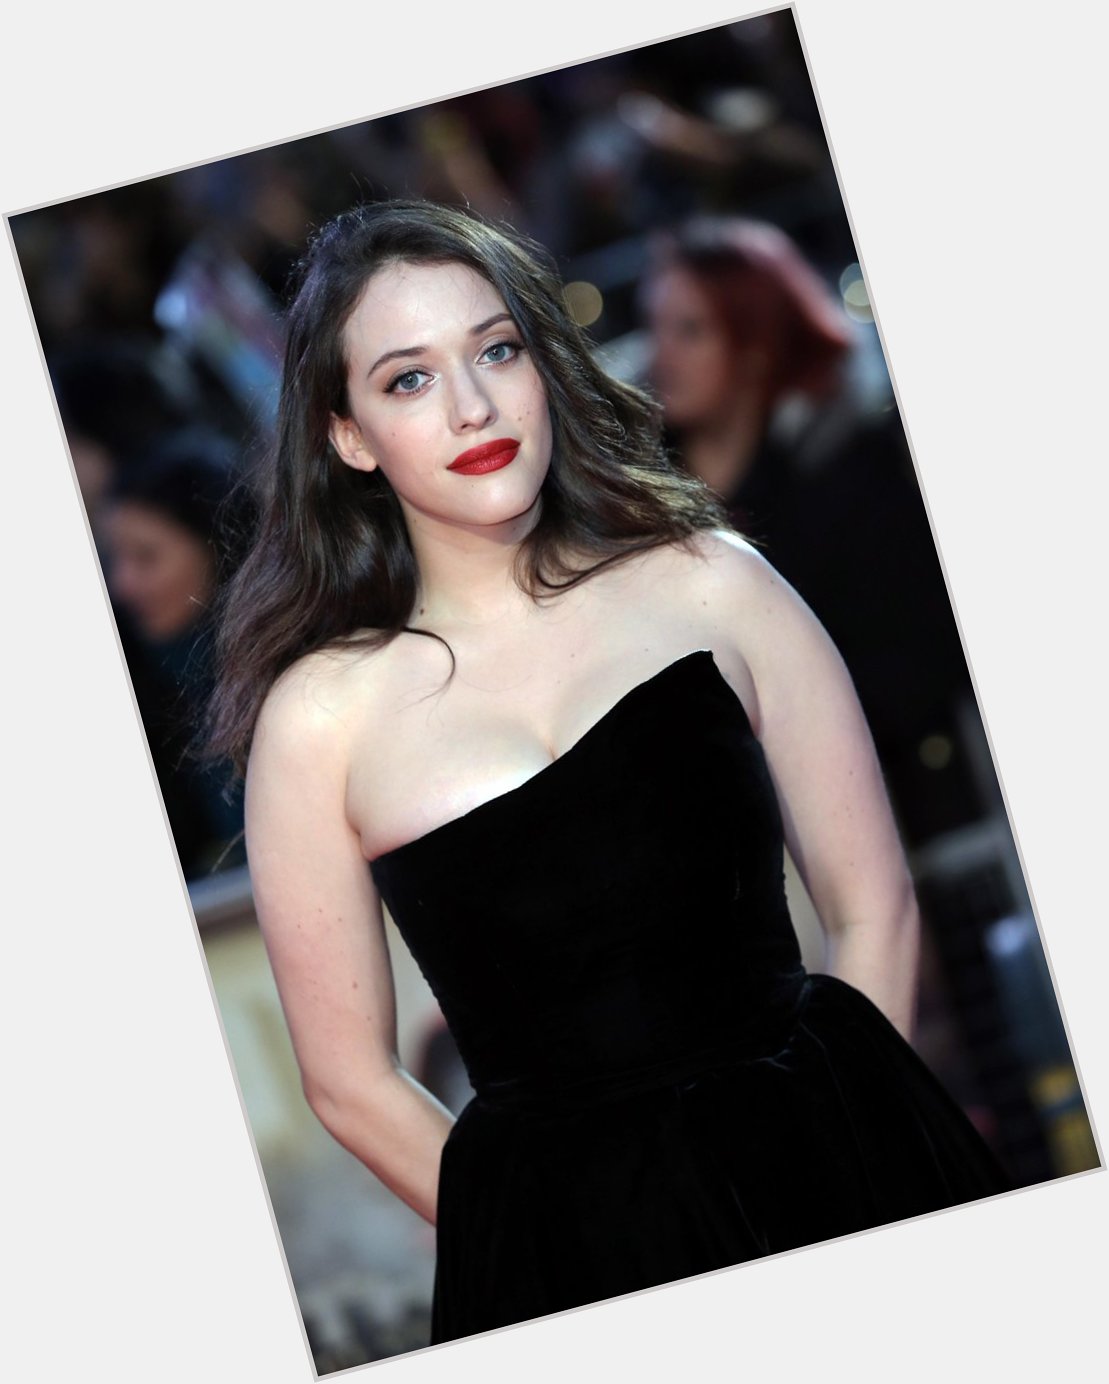 Let\s wish a very happy birthday to Kat Dennings who plays Darcy Lewis in   